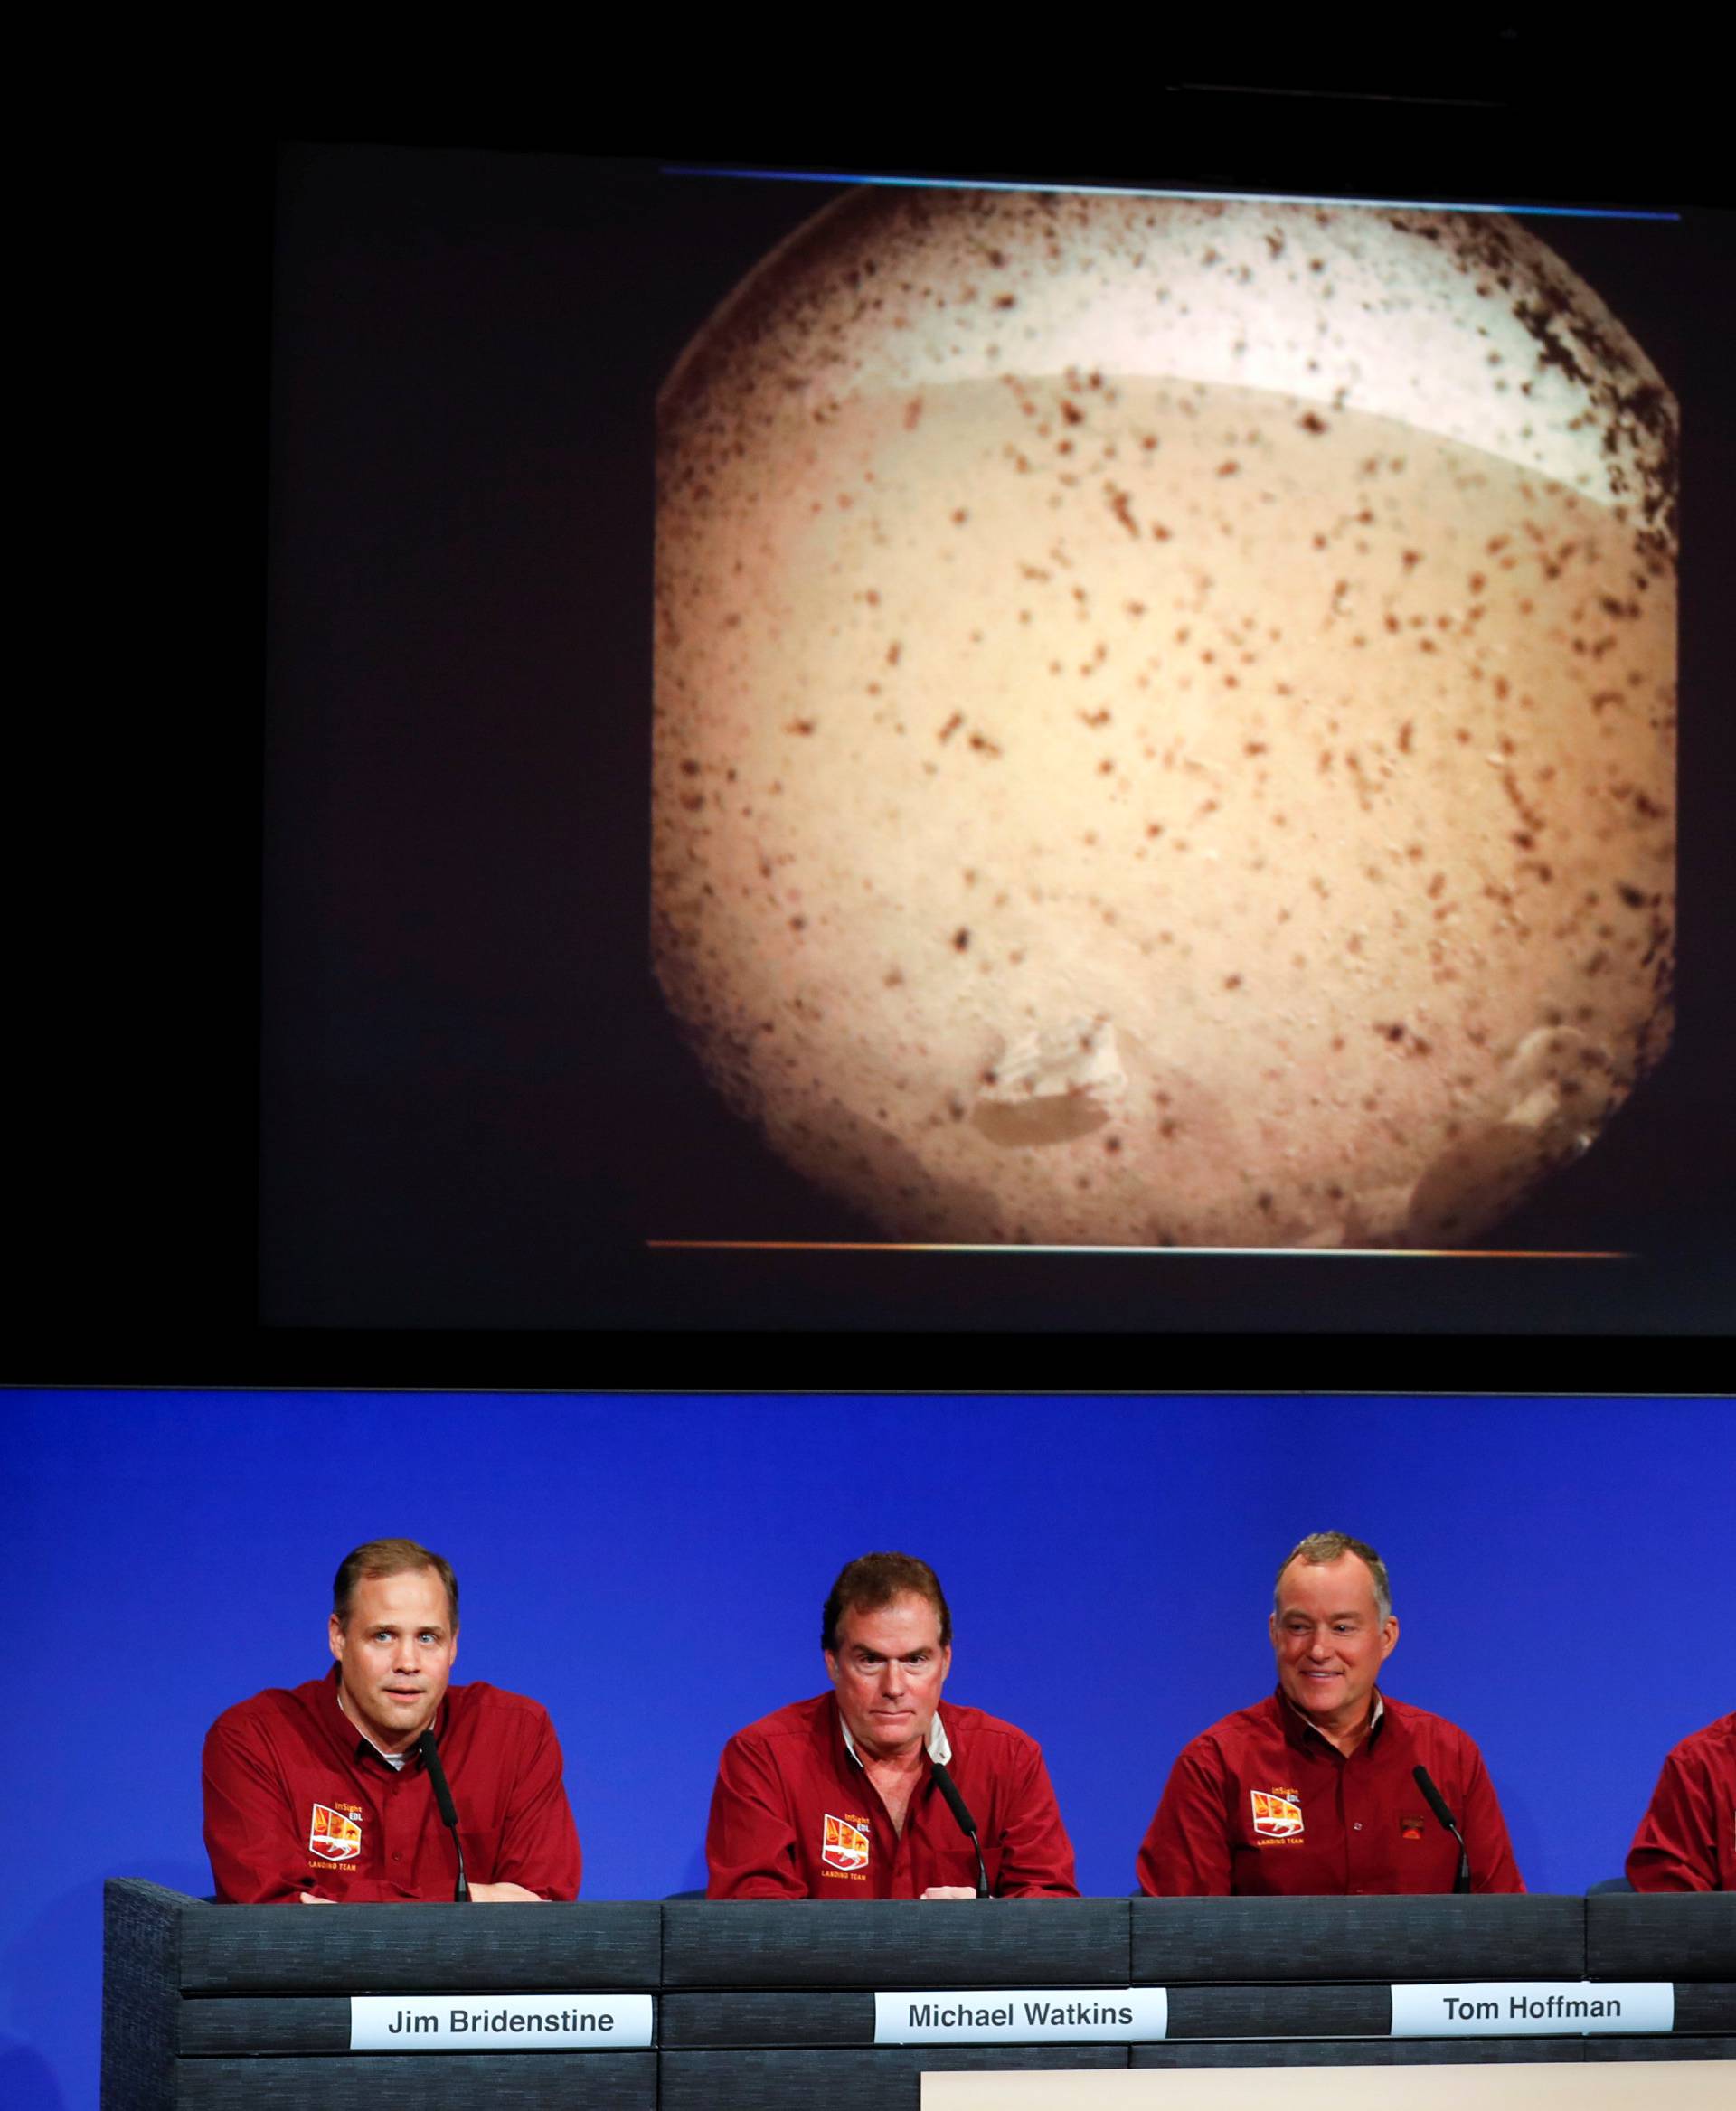 James Bridenstine speaks after the landing of spacecraft InSight on the surface of Mars,  in Pasadena